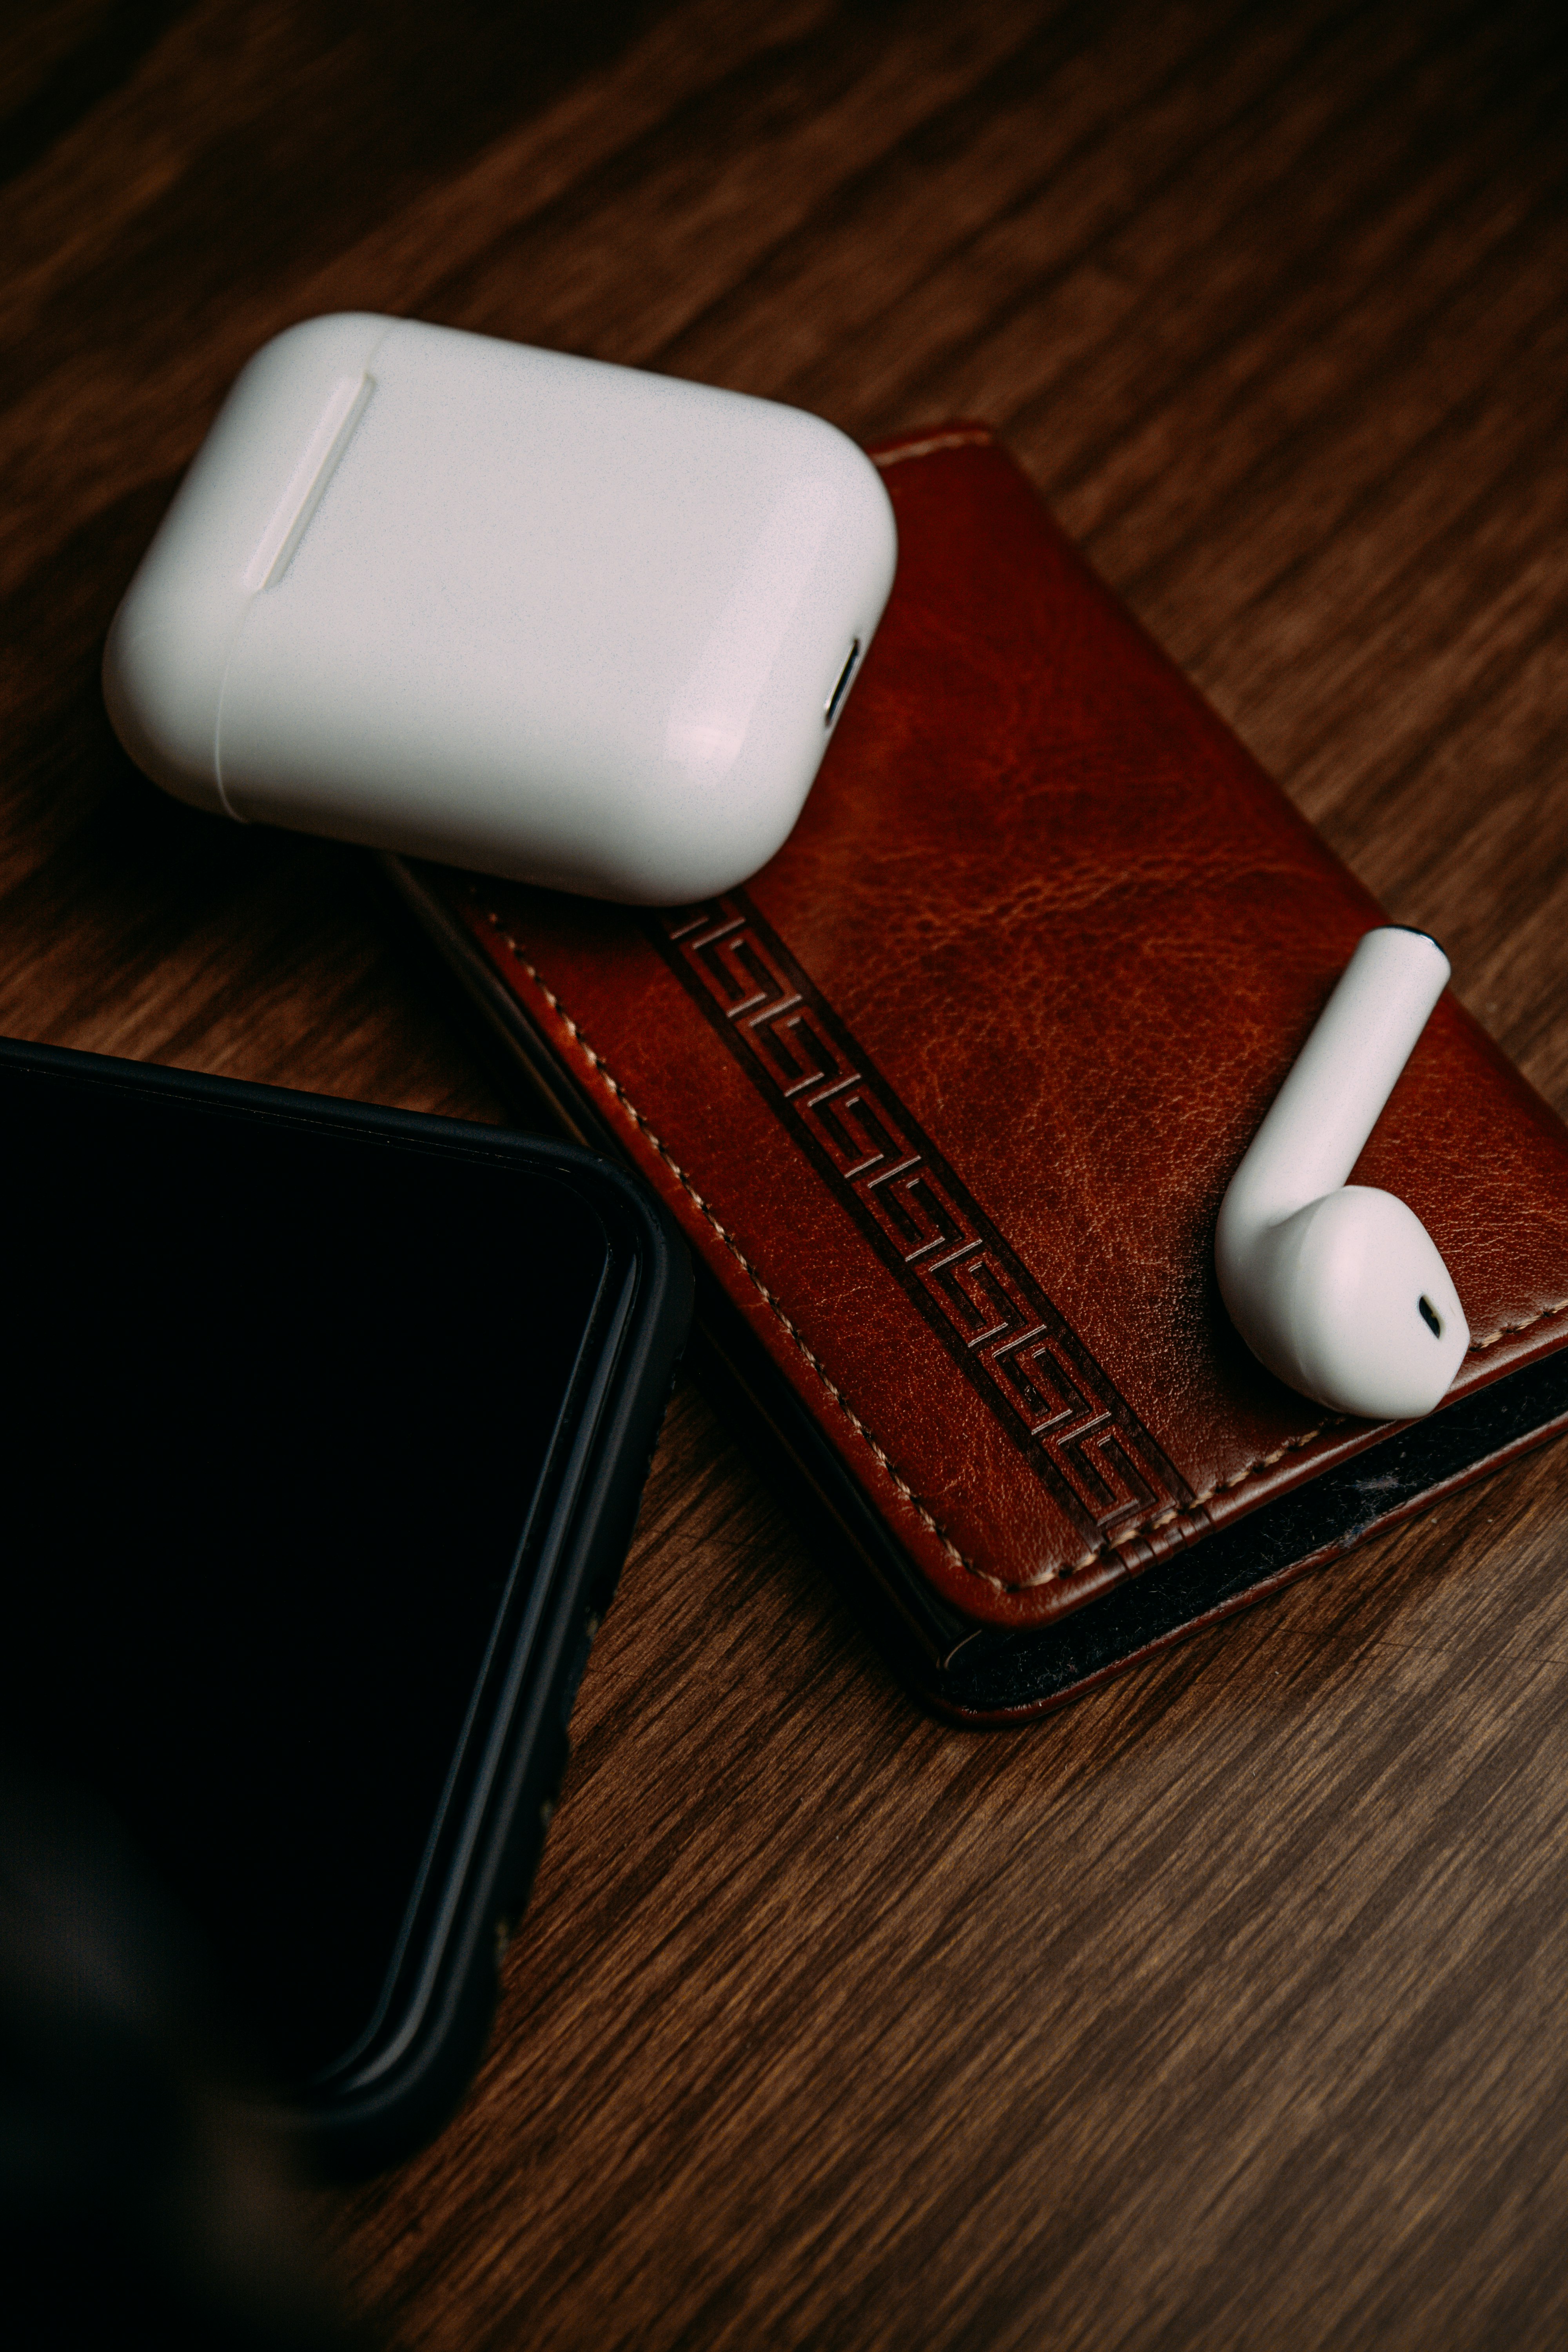 white apple airpods beside brown leather bifold wallet